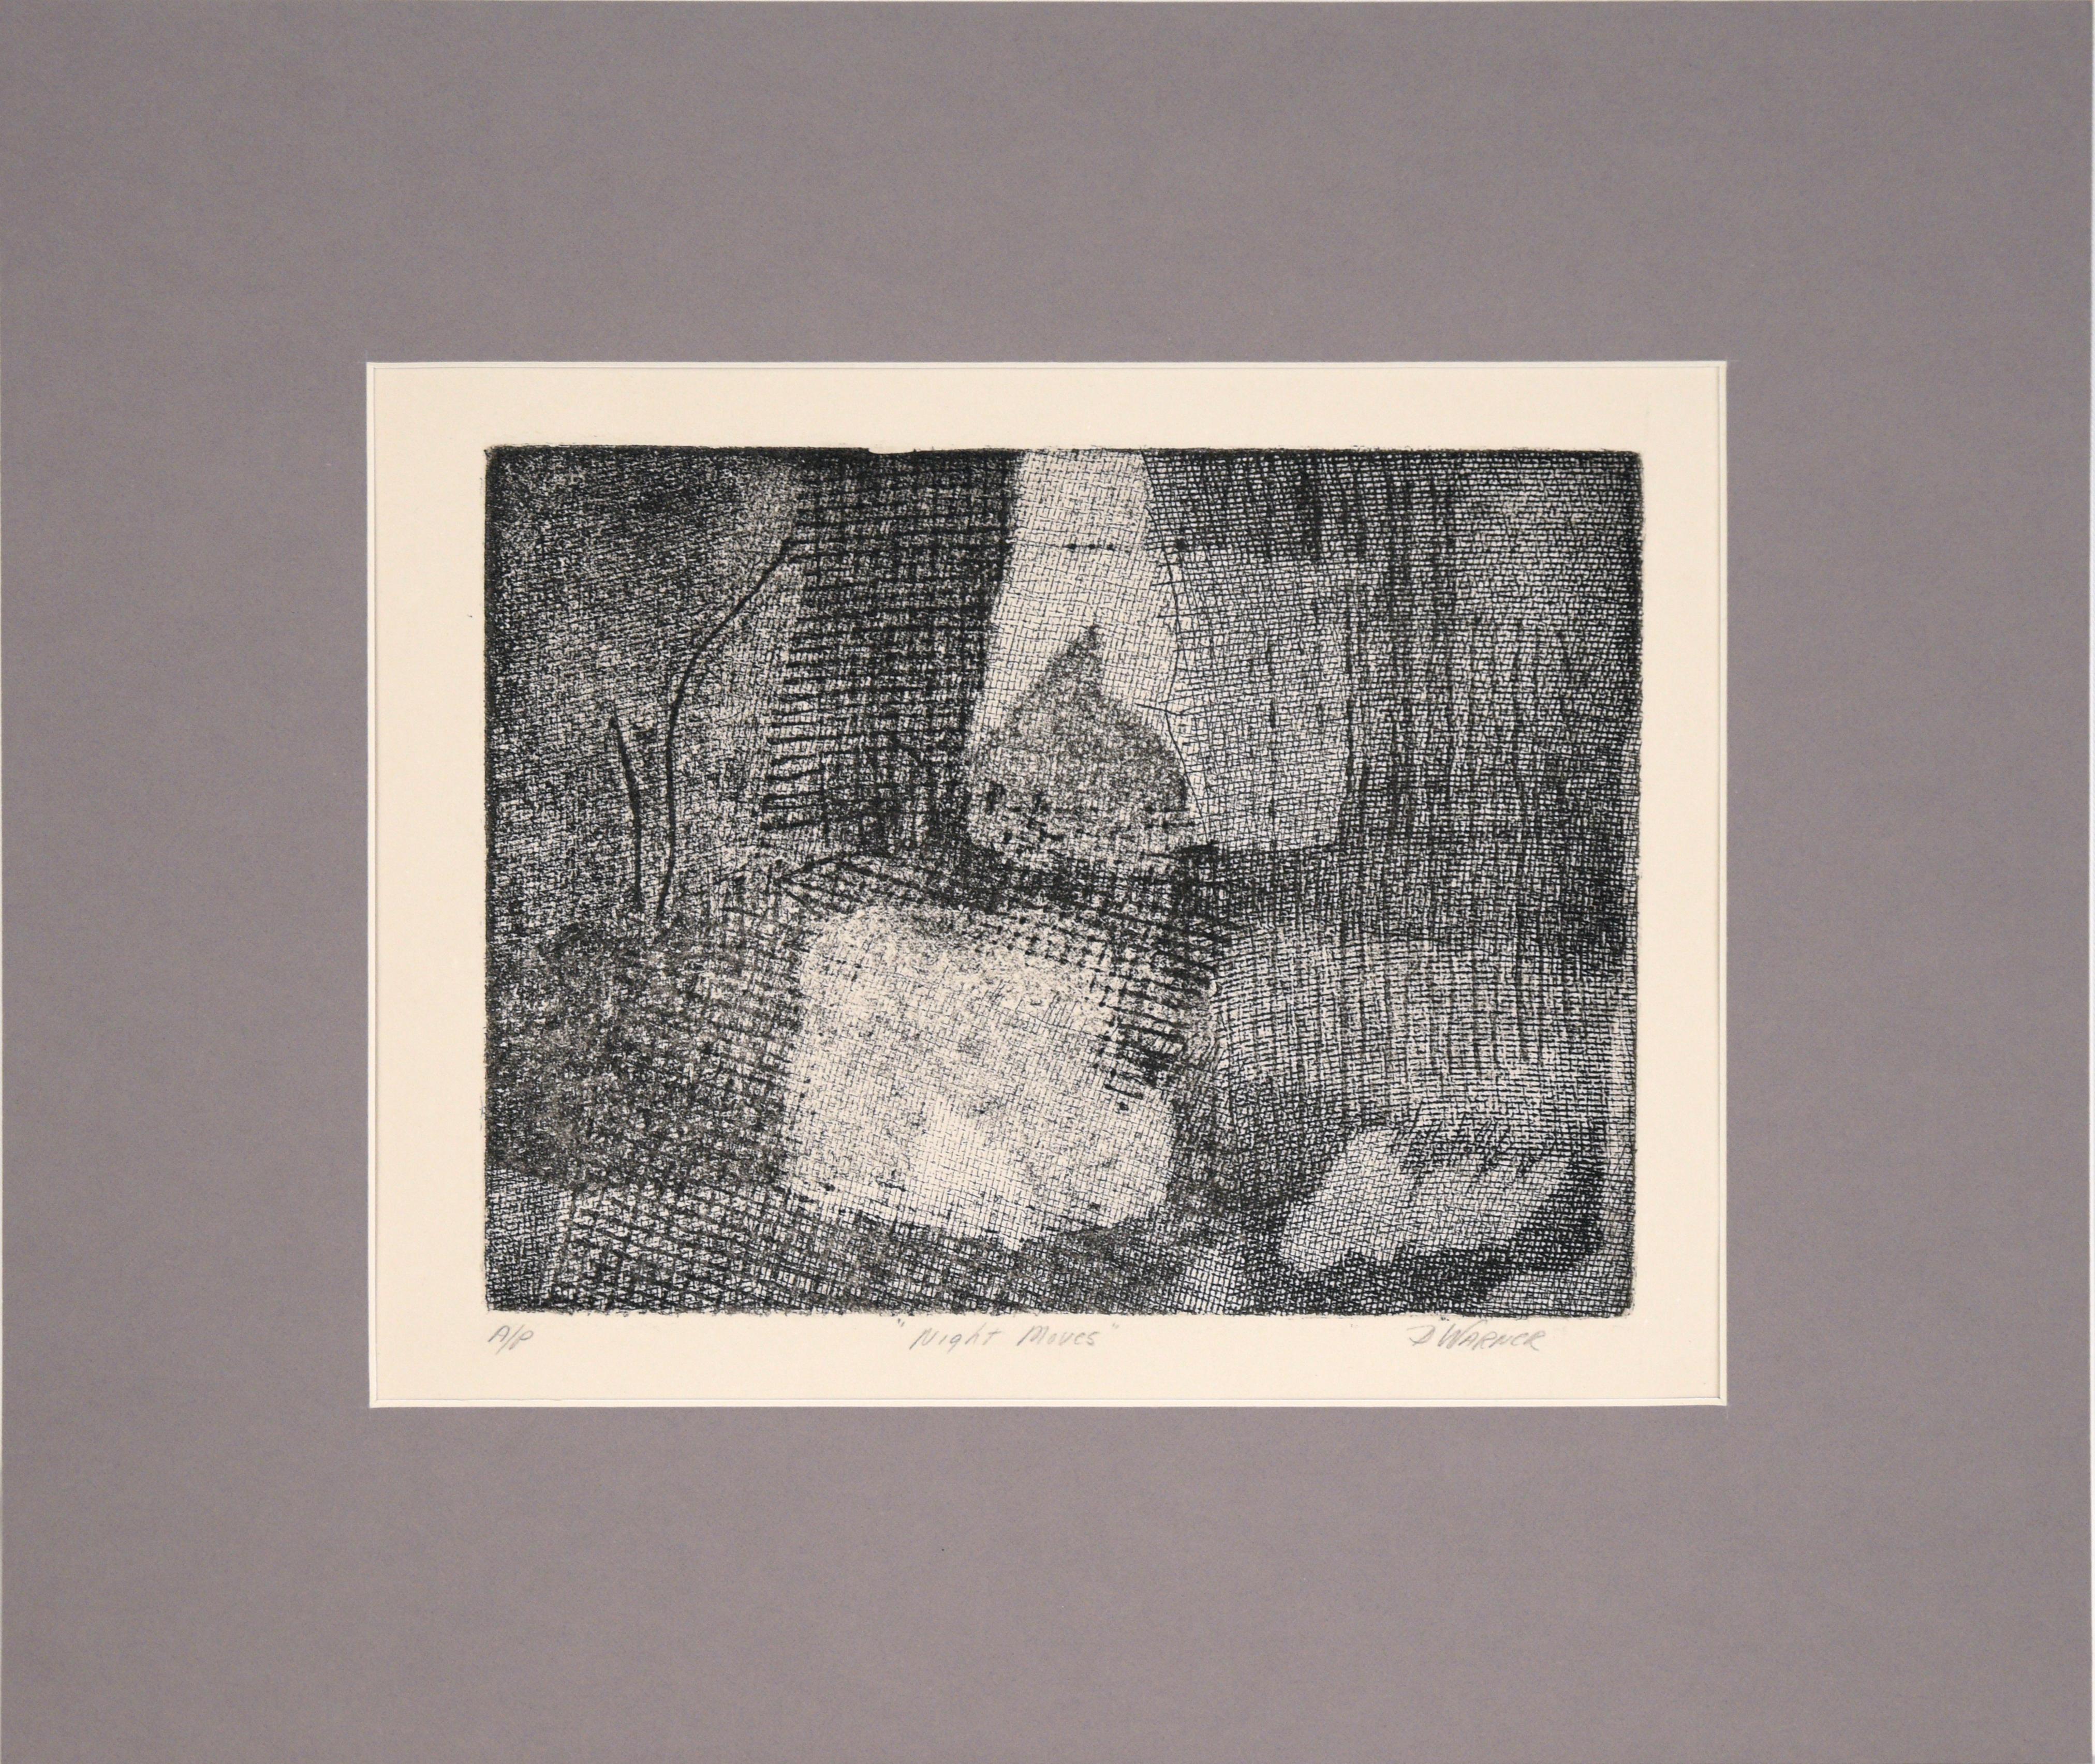 Doris Warner Still-Life Print - "Night Moves" - Abstract Etching in Ink on Paper (Artist's Proof)